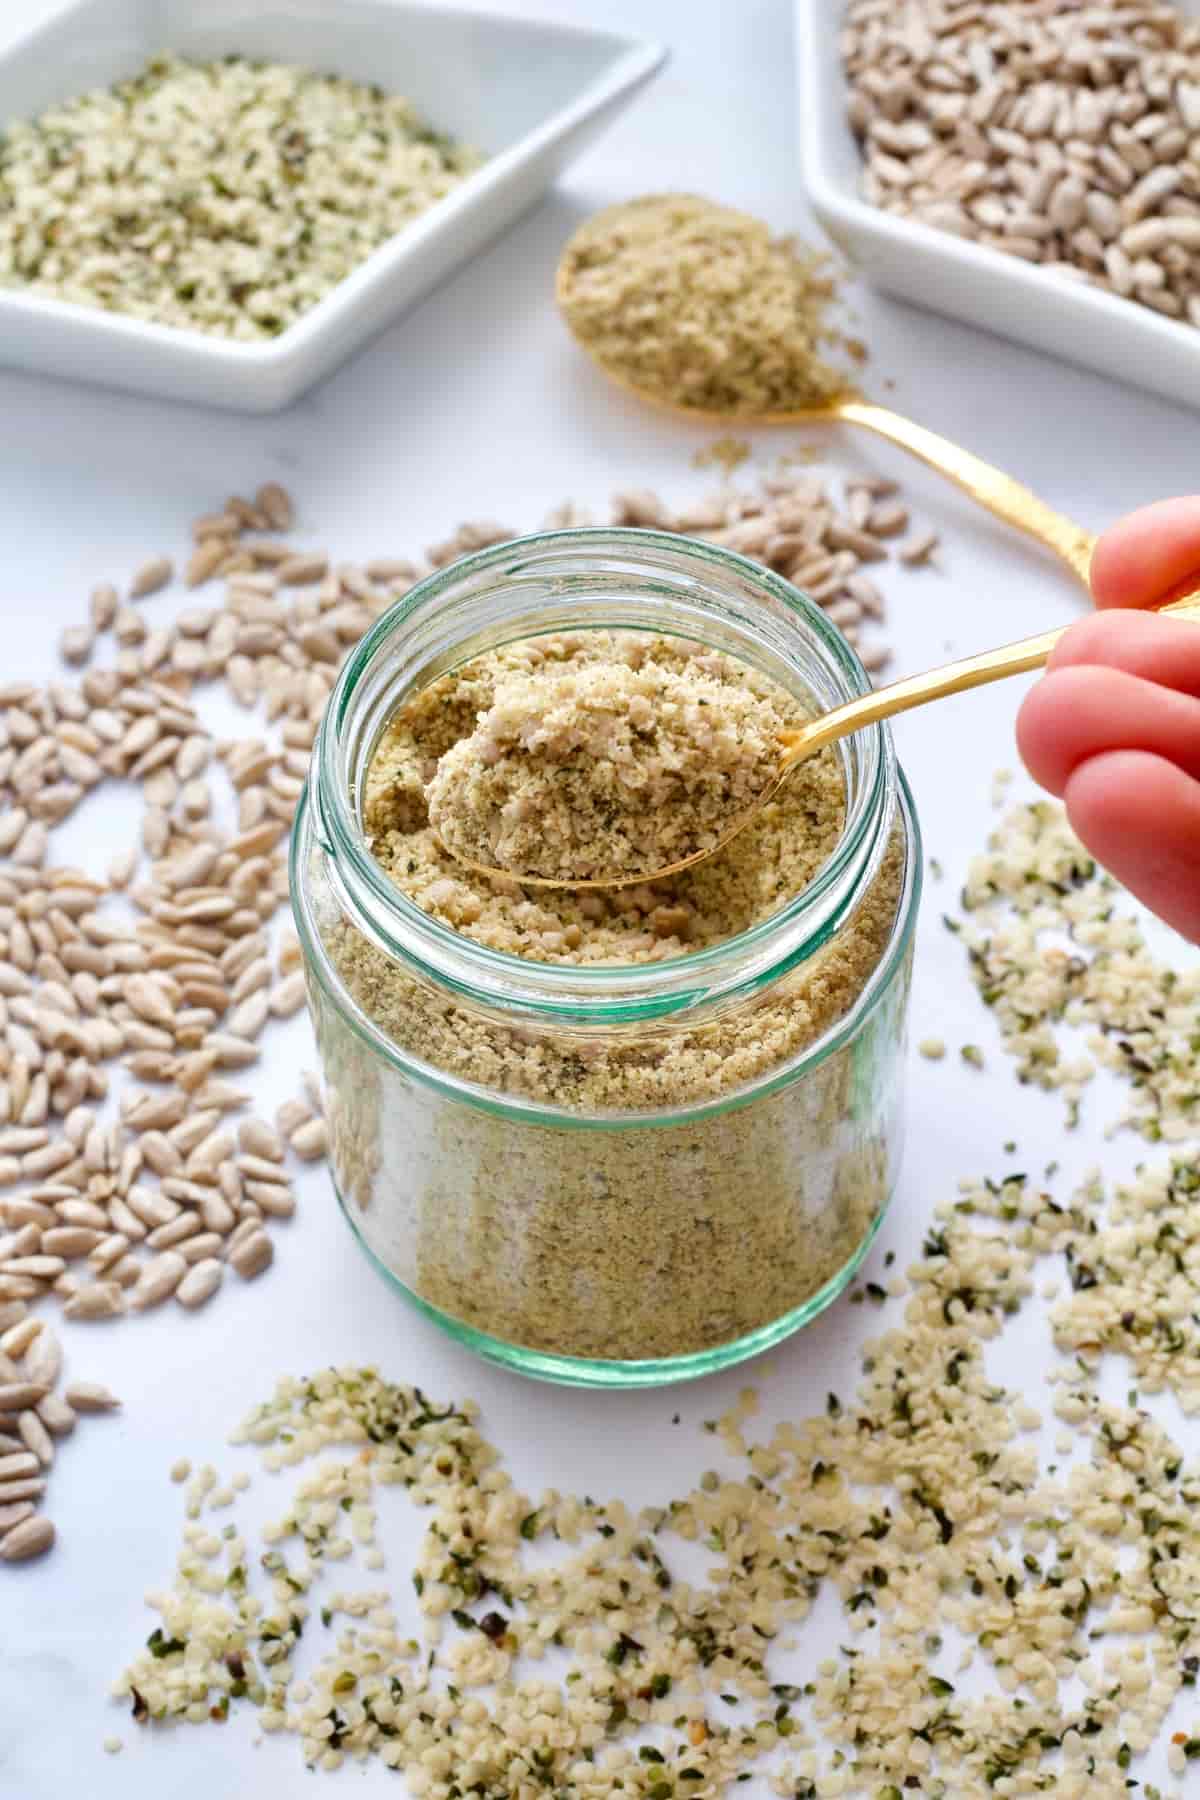 Spoon with vegan parmesan over the jar, scattered seeds around.